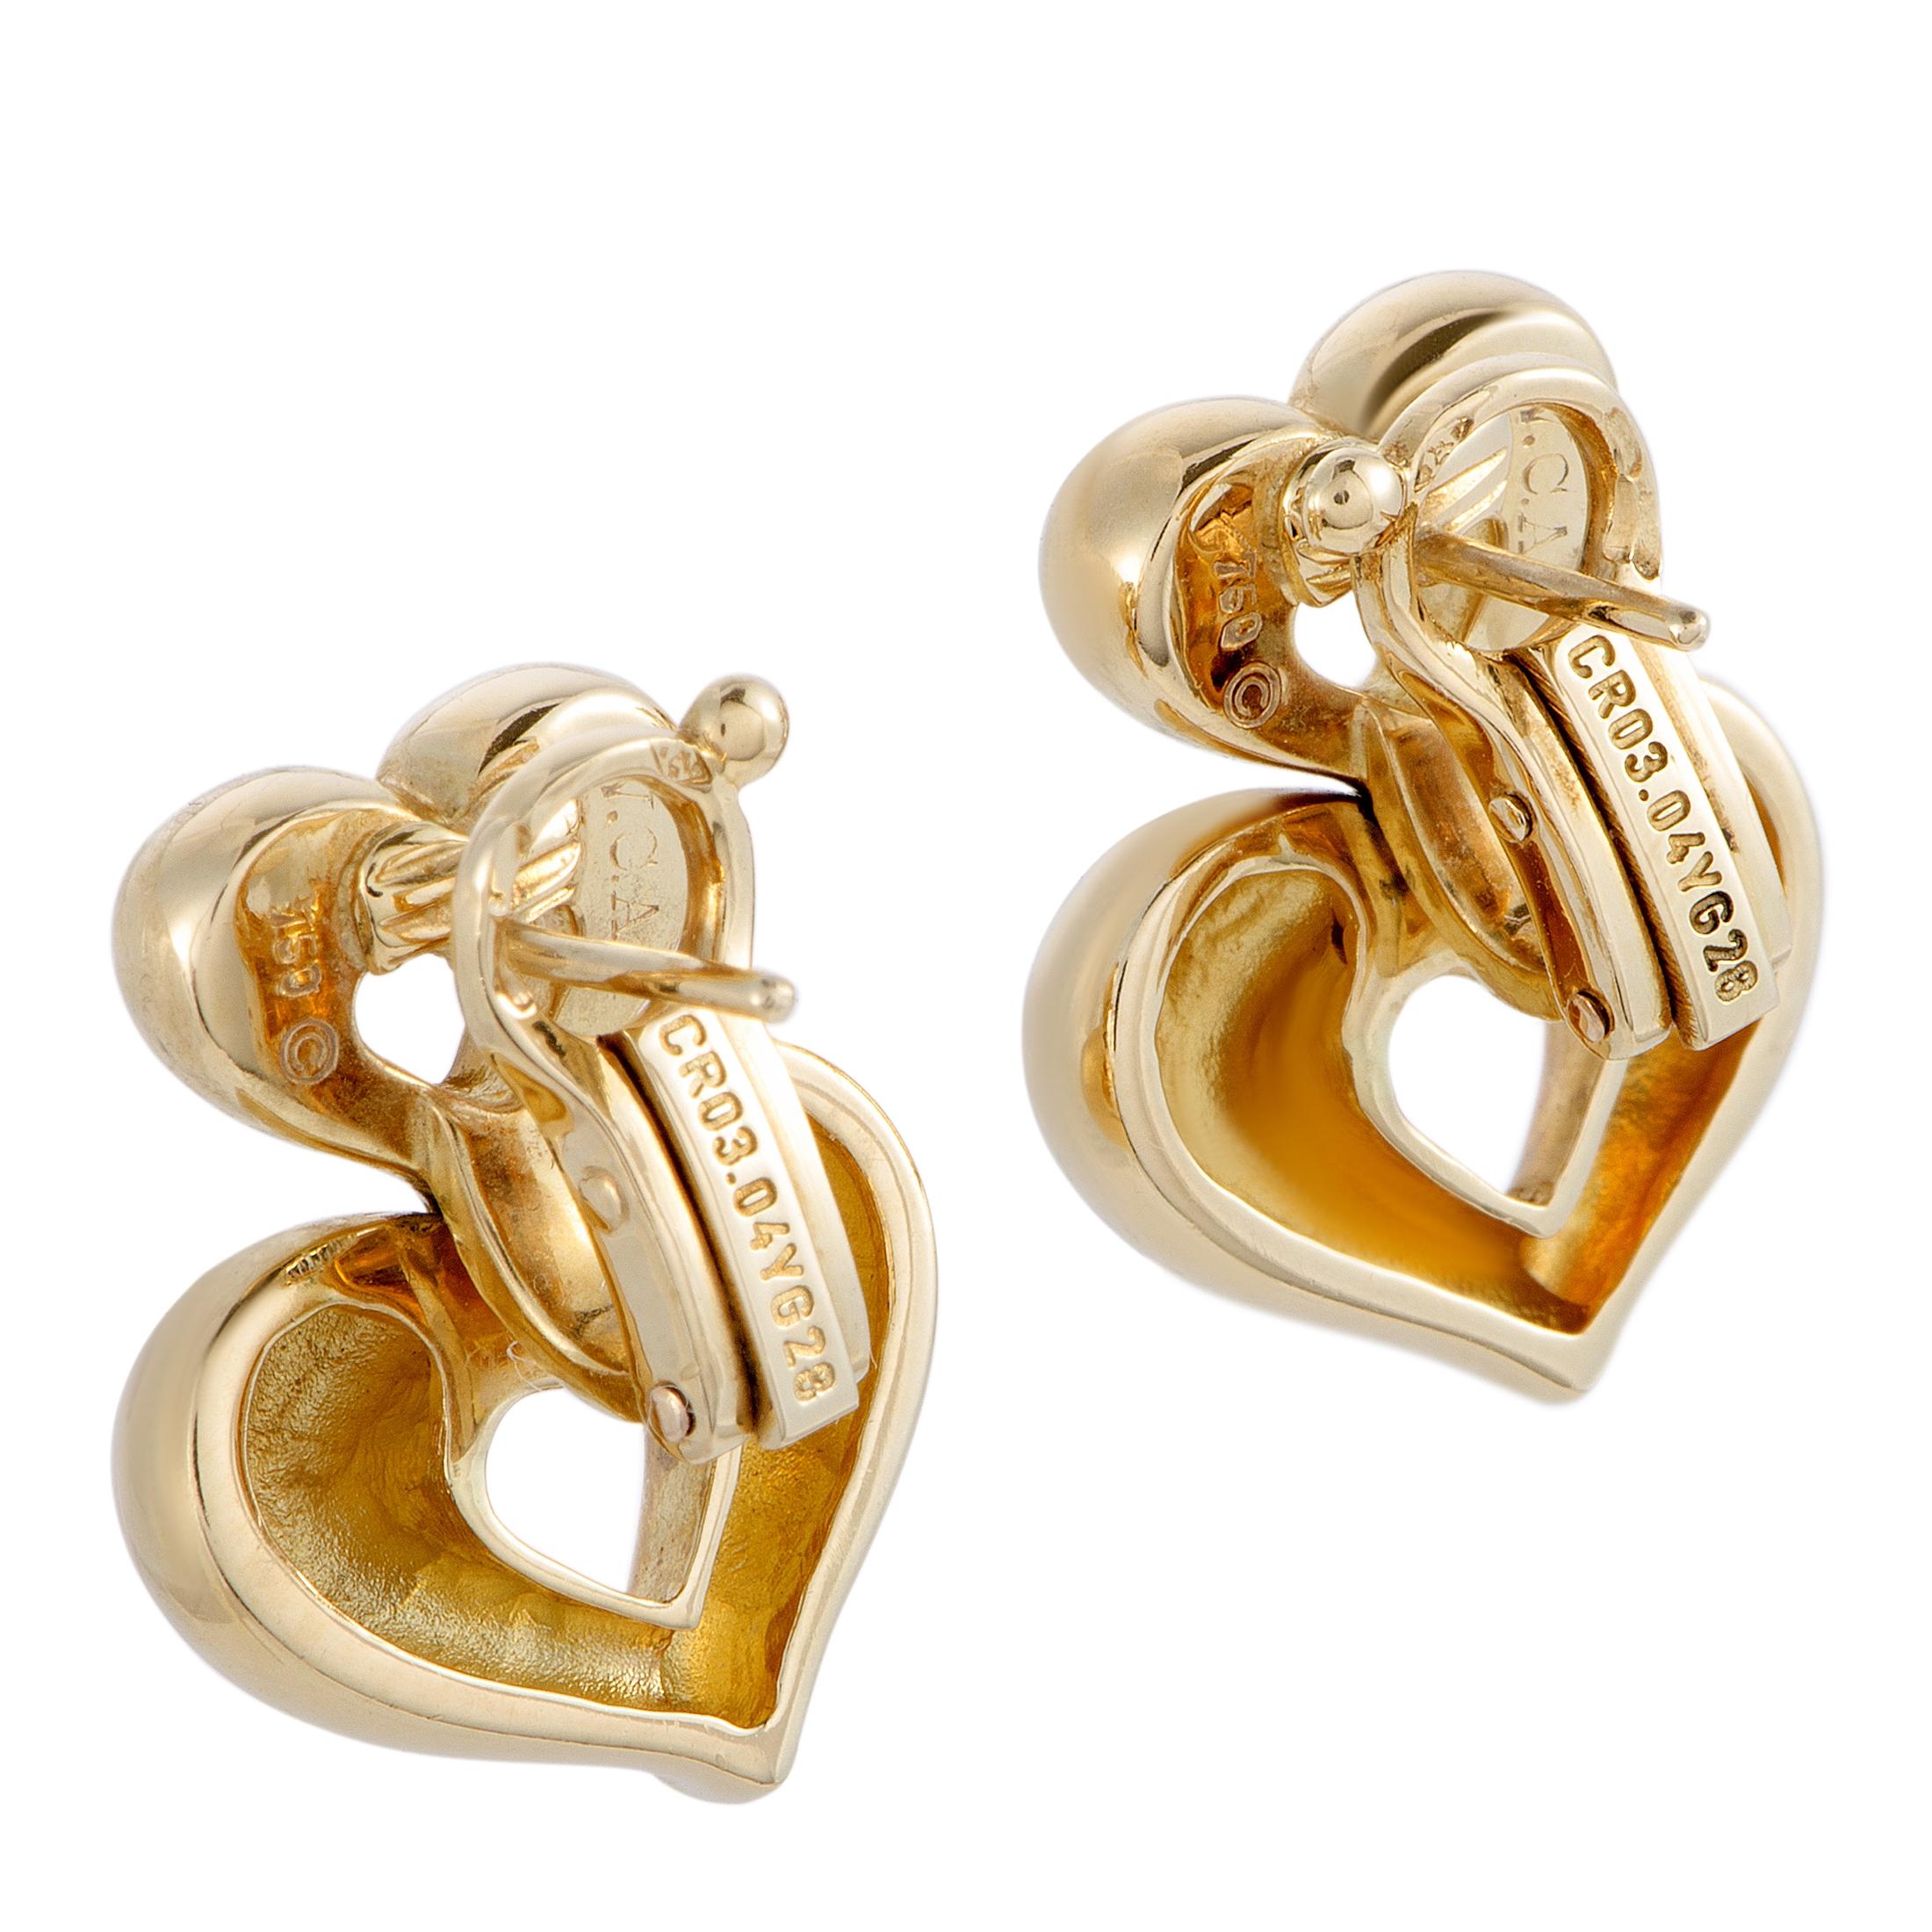 These vintage earrings from Van Cleef & Arpels are crafted from 18K yellow gold and each of the two weighs 8.7 grams, measuring 0.80” in length and 0.55” in width.
 
 The earrings are offered in estate condition and include the manufacturer’s box.